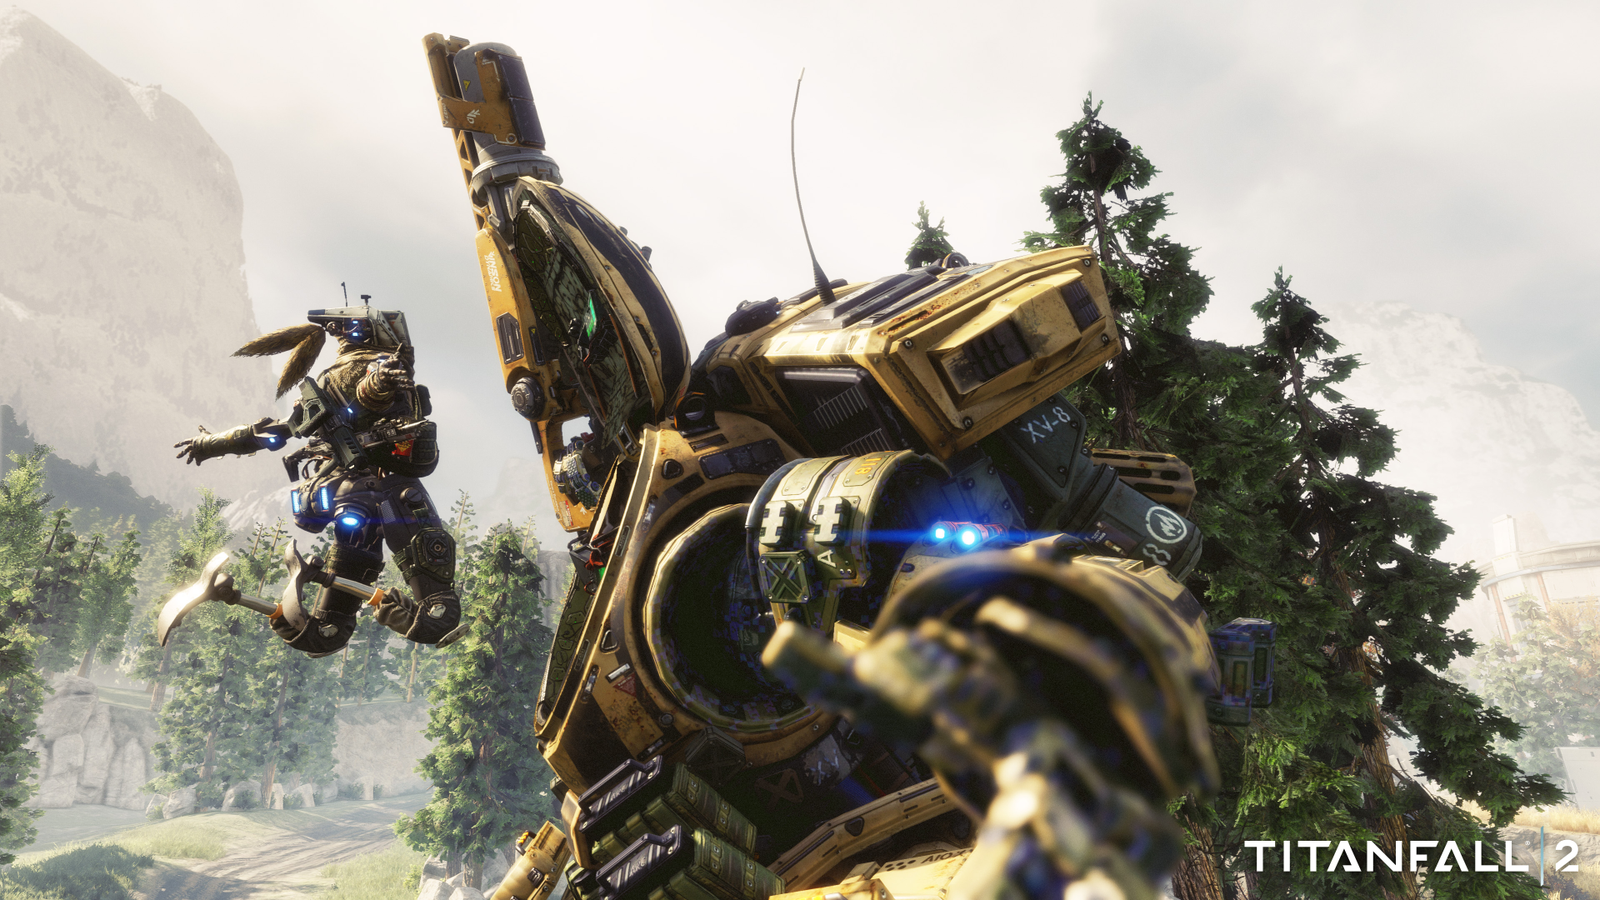 Titanfall 2 release date, single-player mode, footage appear ahead of E3 -  The Verge